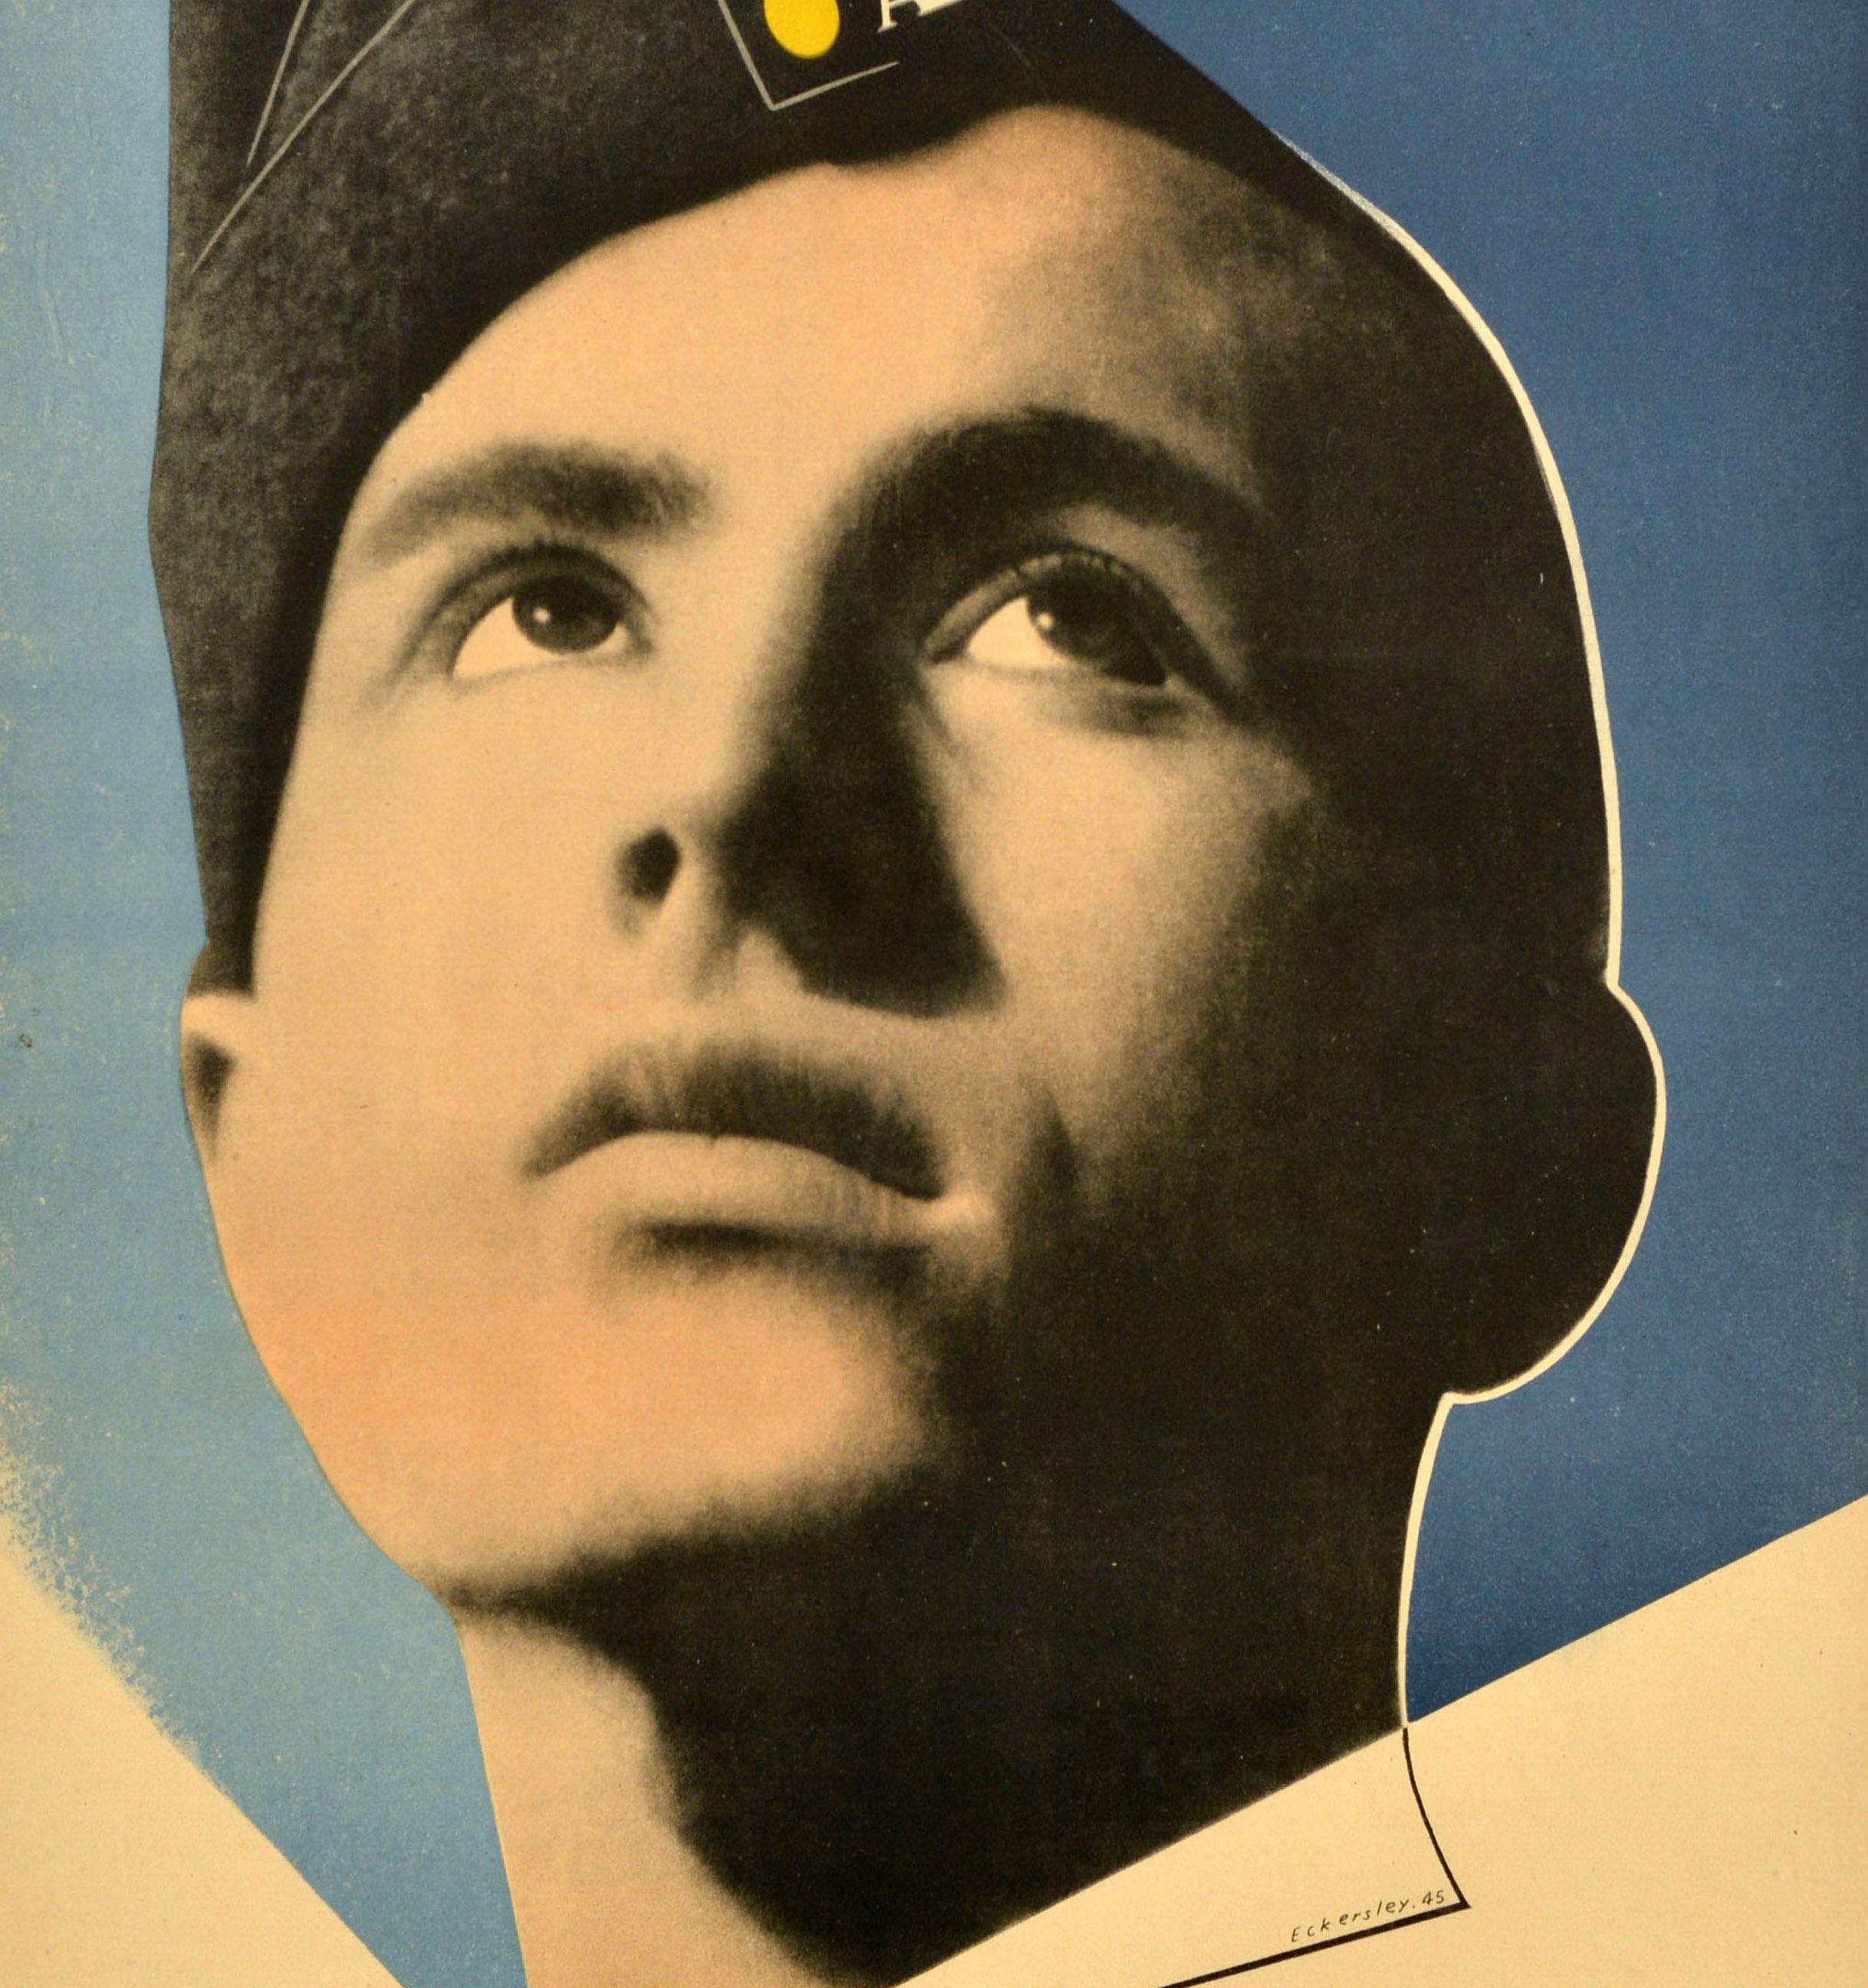 Original vintage World War Two military recruitment propaganda poster - Join The Regular Air Force - featuring a great design by the notable artist Tom Eckersley (1914-1997) of a young soldier in uniform looking up to the caption diagonally on his